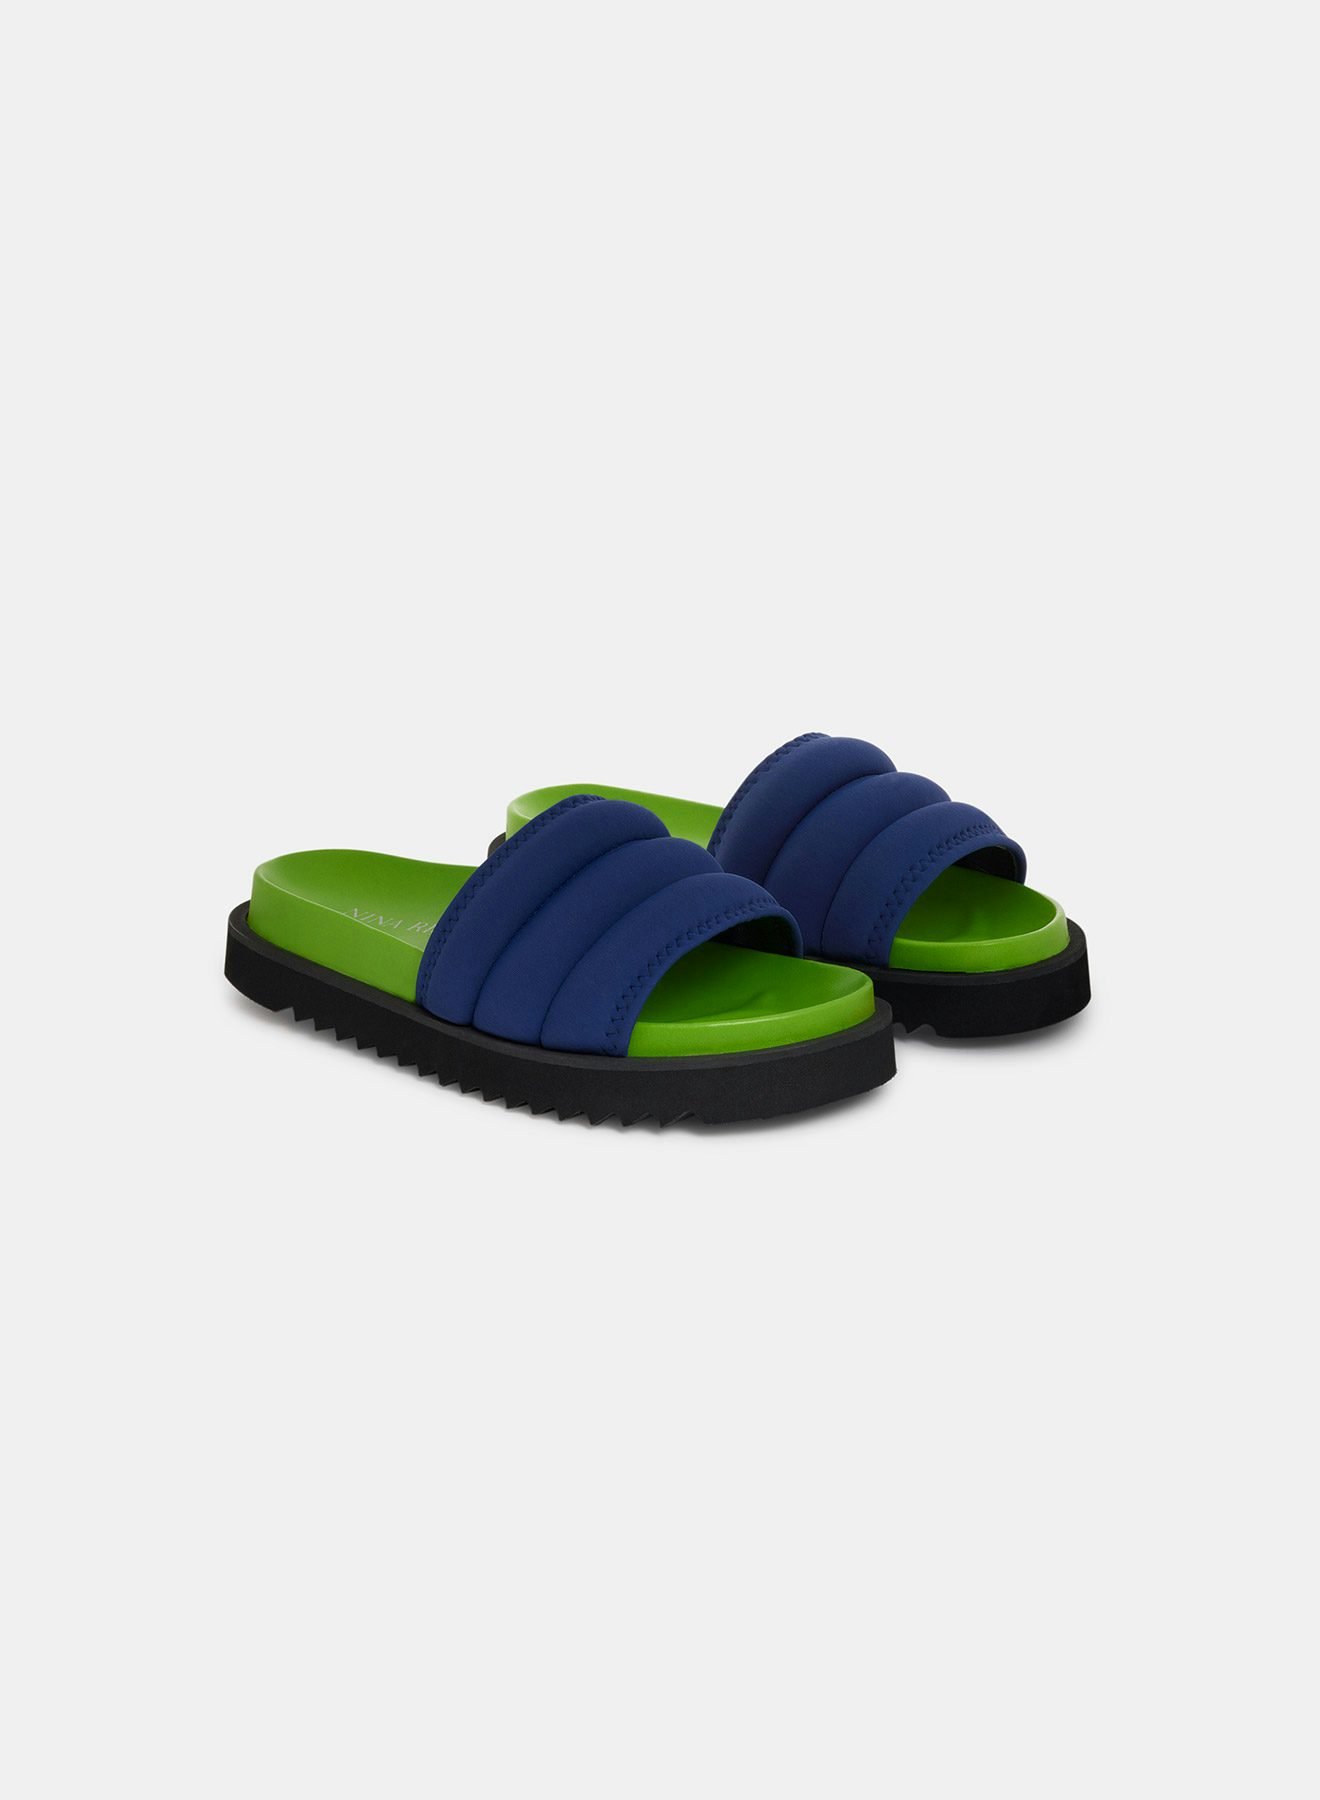 Quilted Dark Navy Blue Neoprene Slides with Green Leather Sole - Nina Ricci